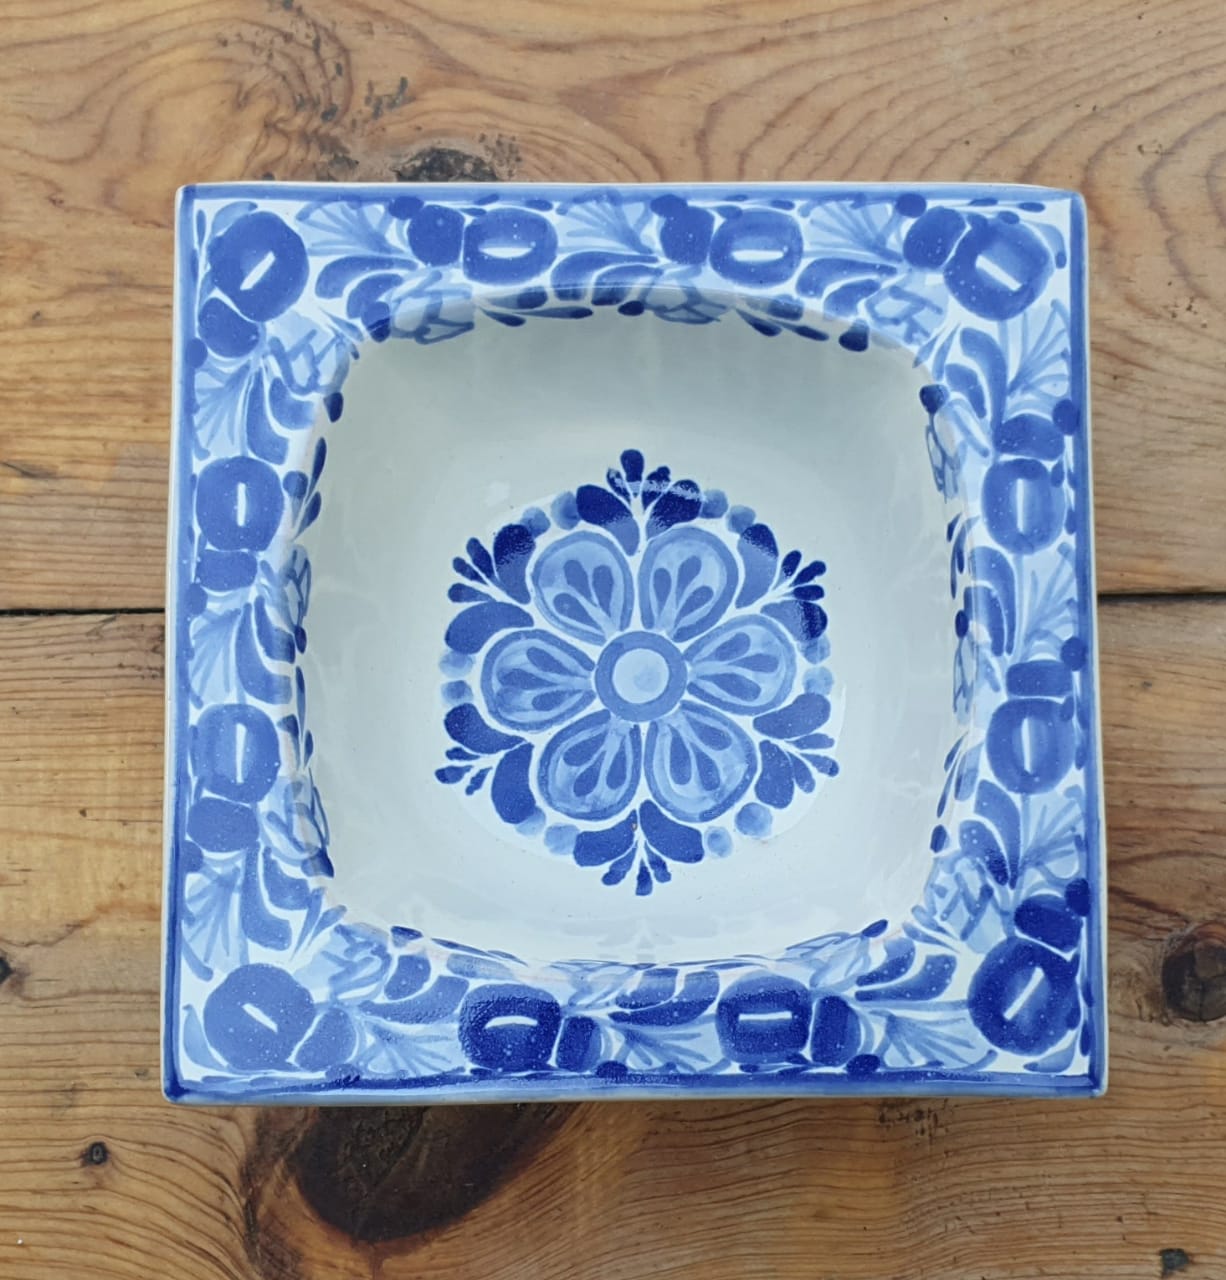 Flower Square Bowl Blue and White